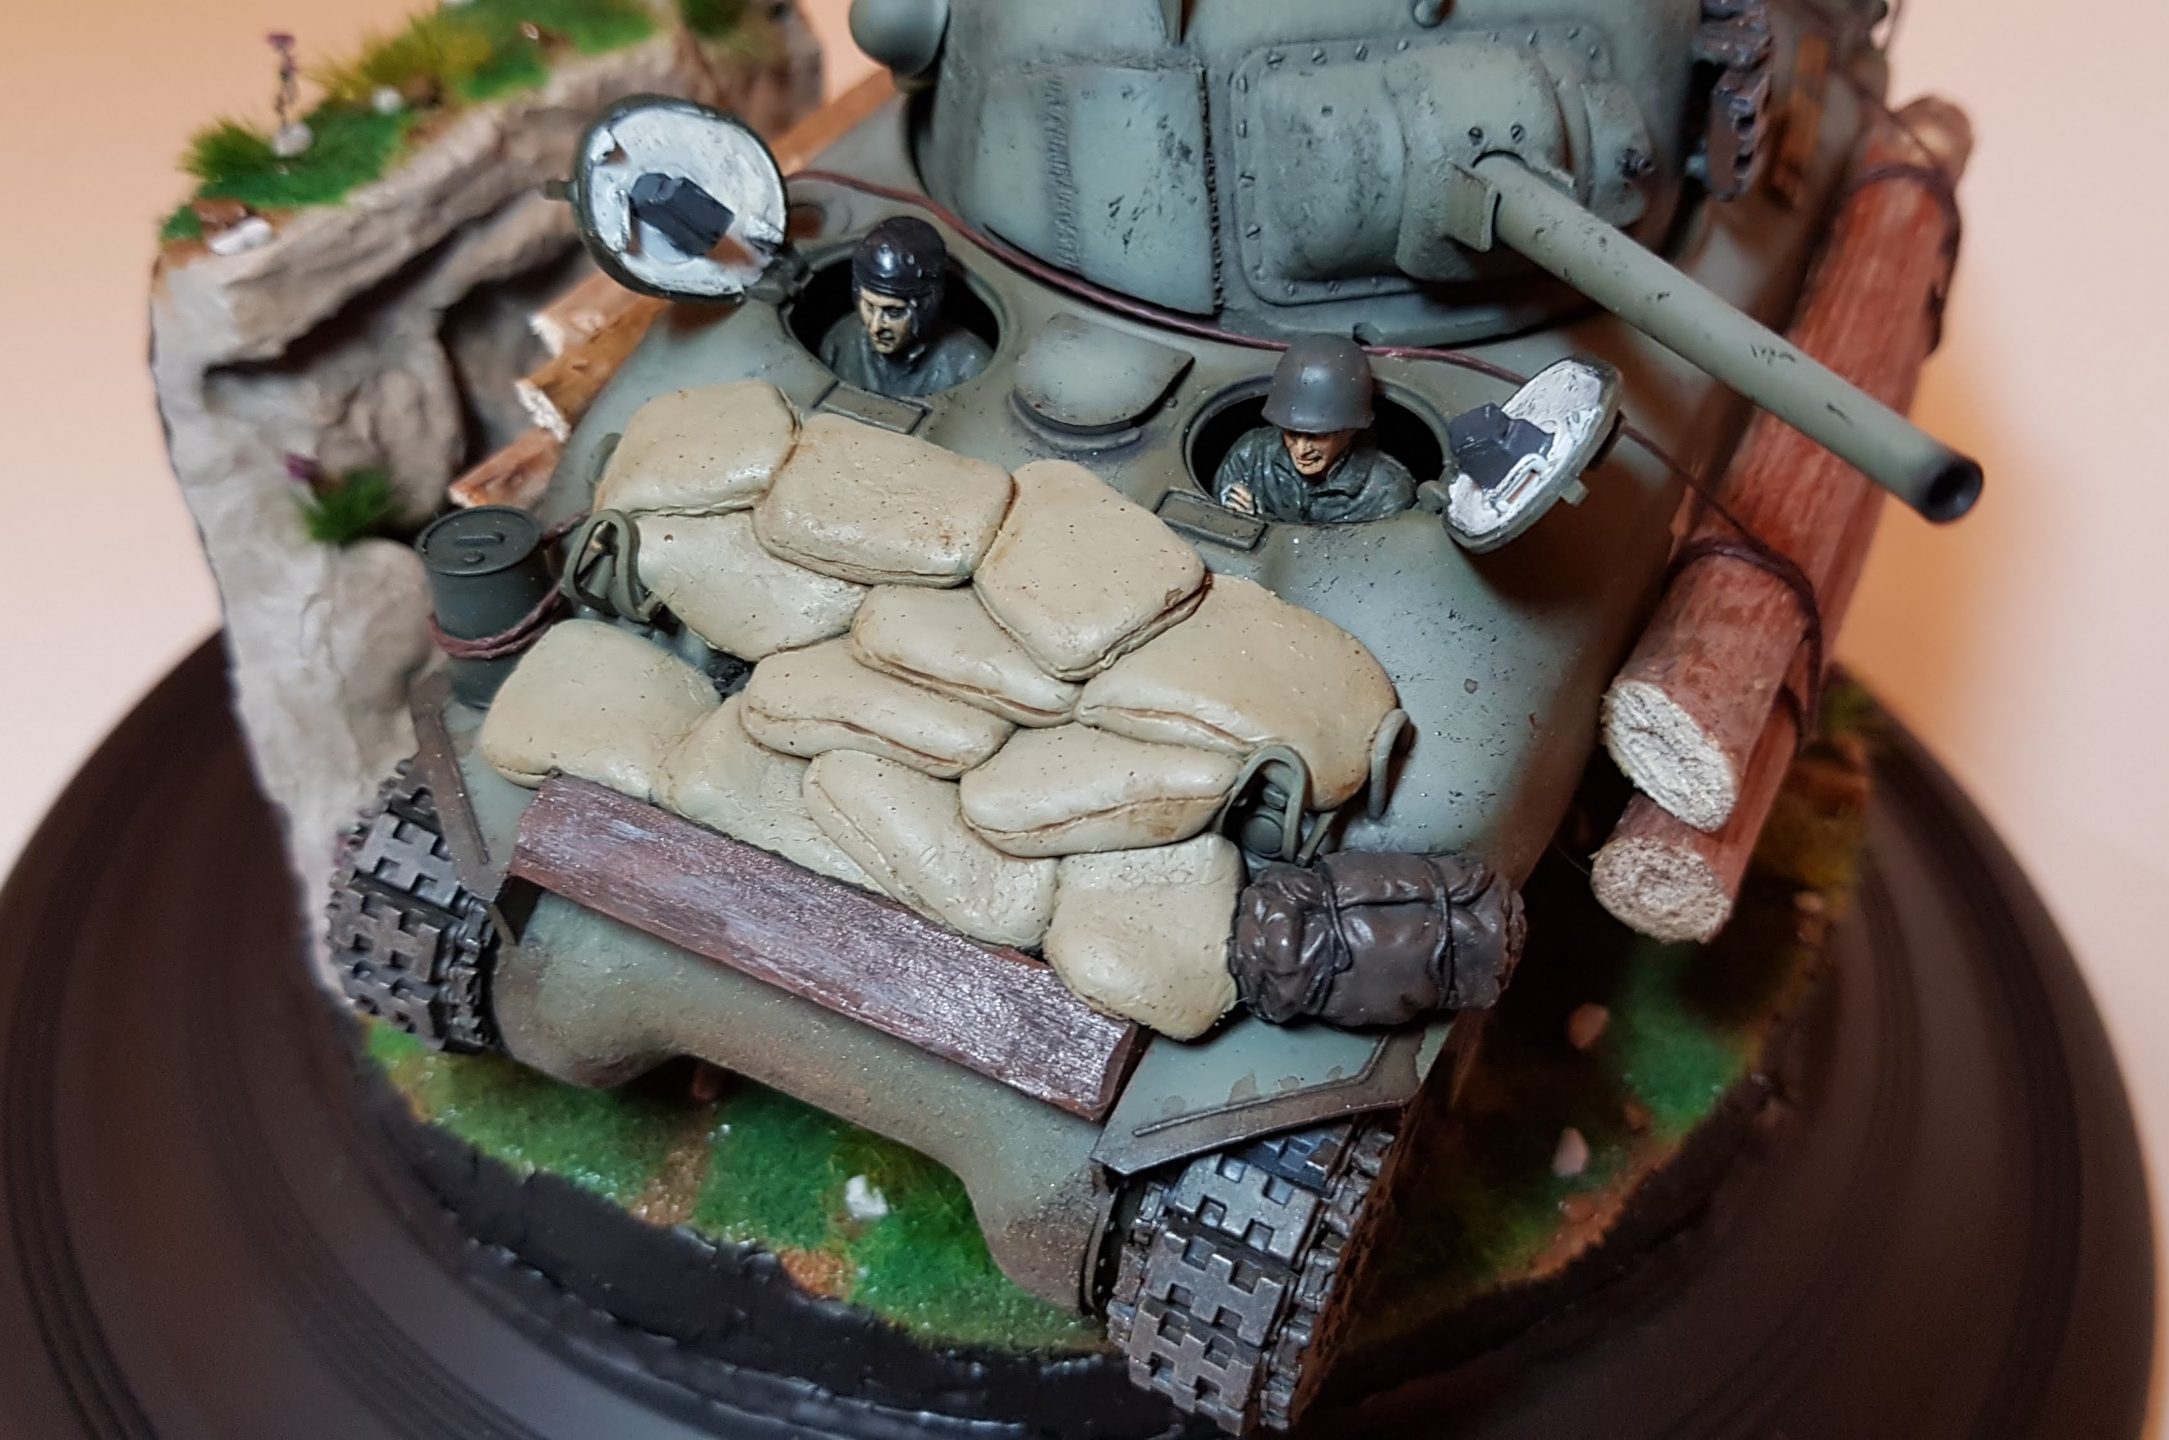 Kit-bashed - M4 Sherman (WW2) - Sculpted Sandbags Closeup - 1/35 Scale - Built By Wright Built - Tamiya, Italeri, Formations, Others, Sculpted